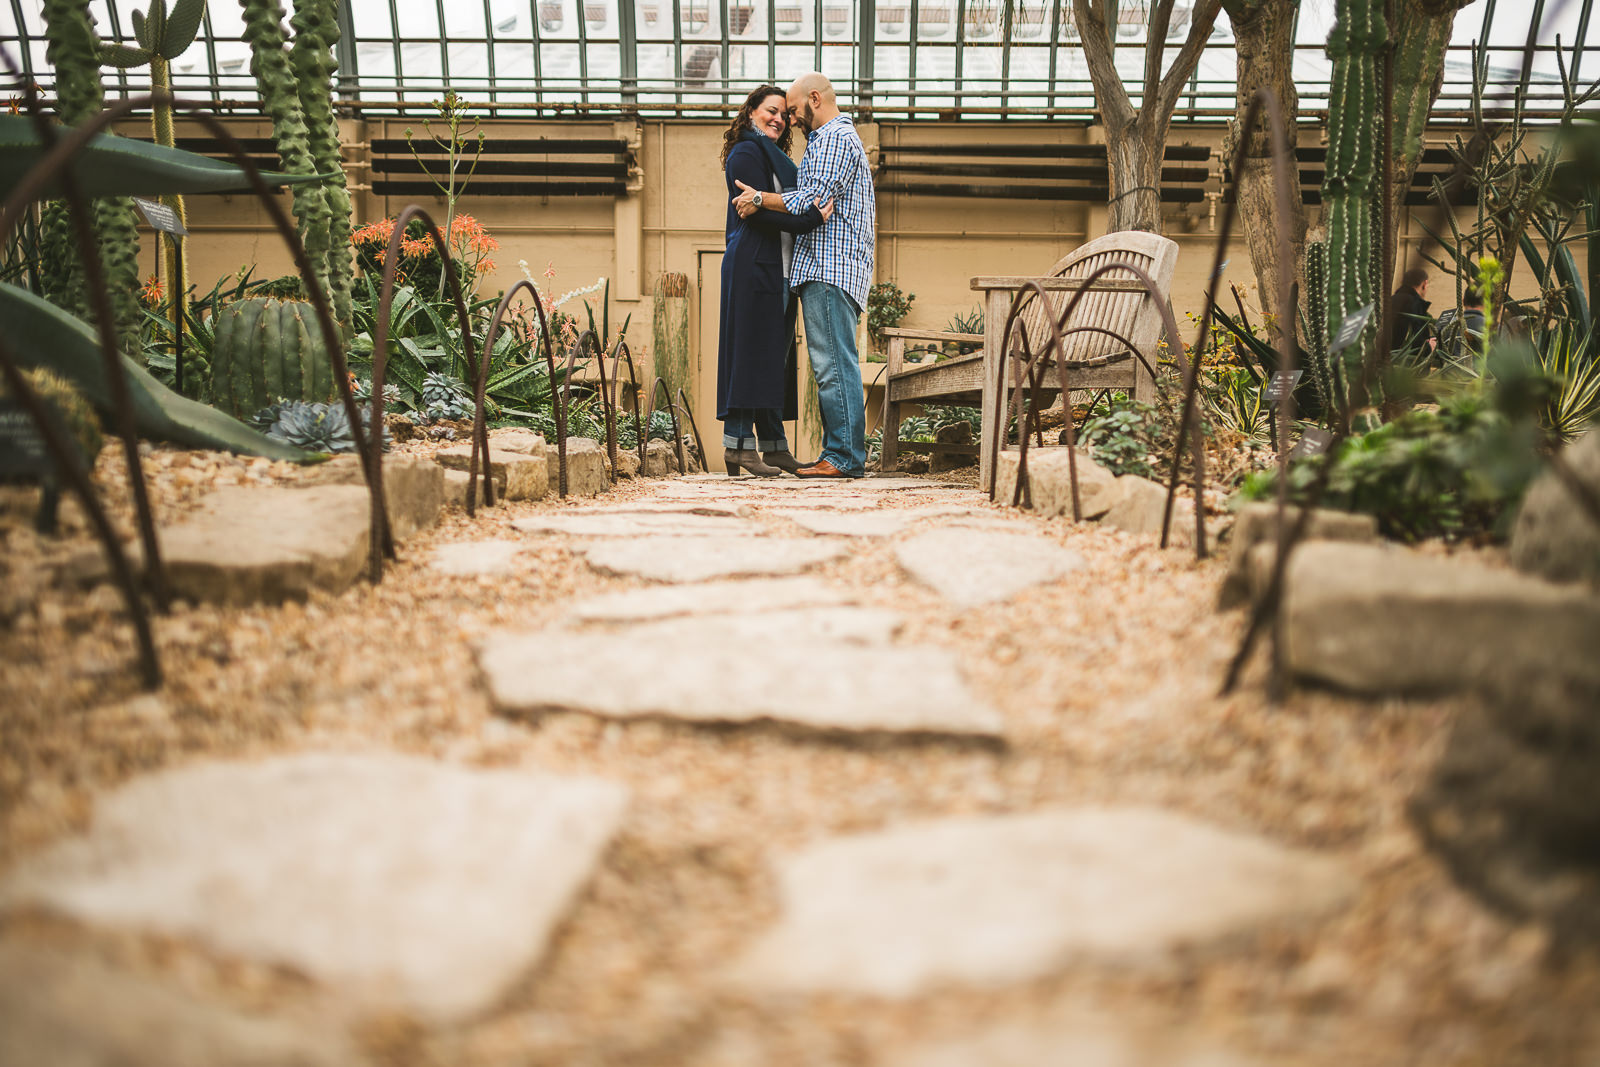 15 garfield park conservatory engagement session photos